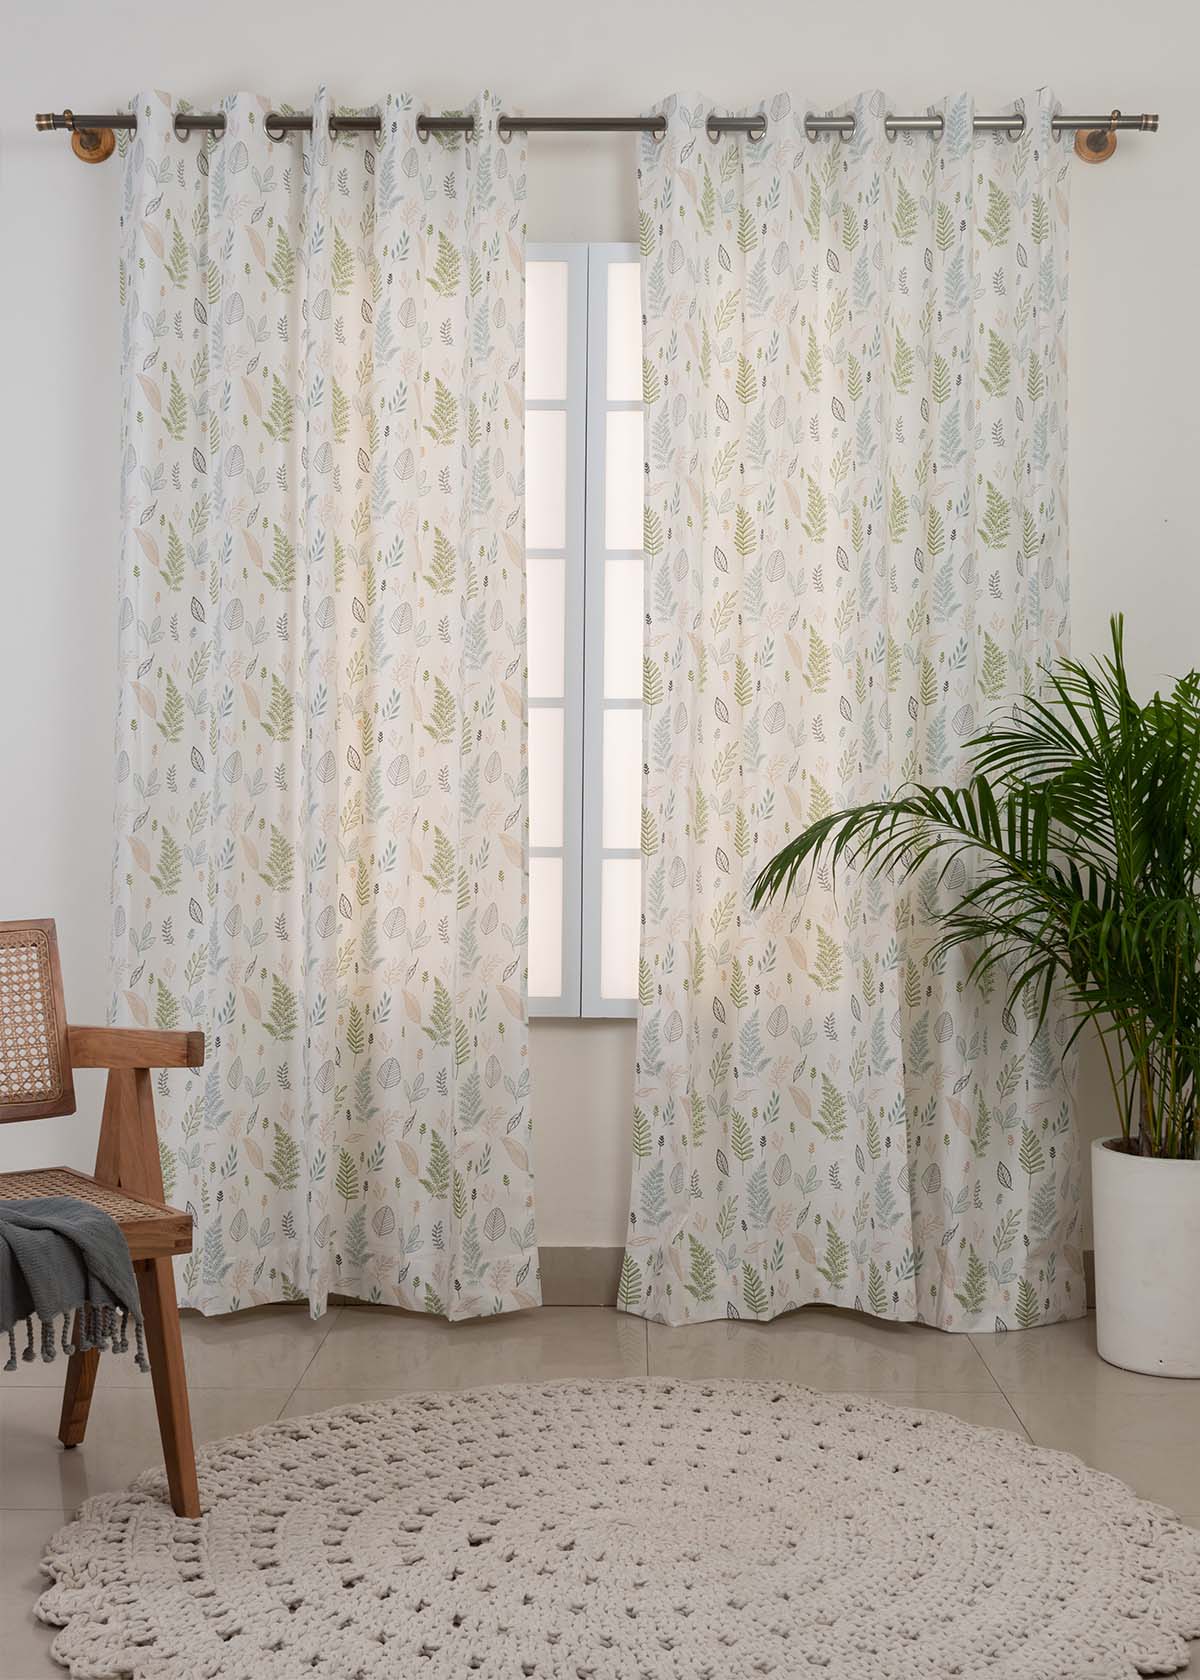 Rustling Leaves Printed Cotton Curtain - Green - Single